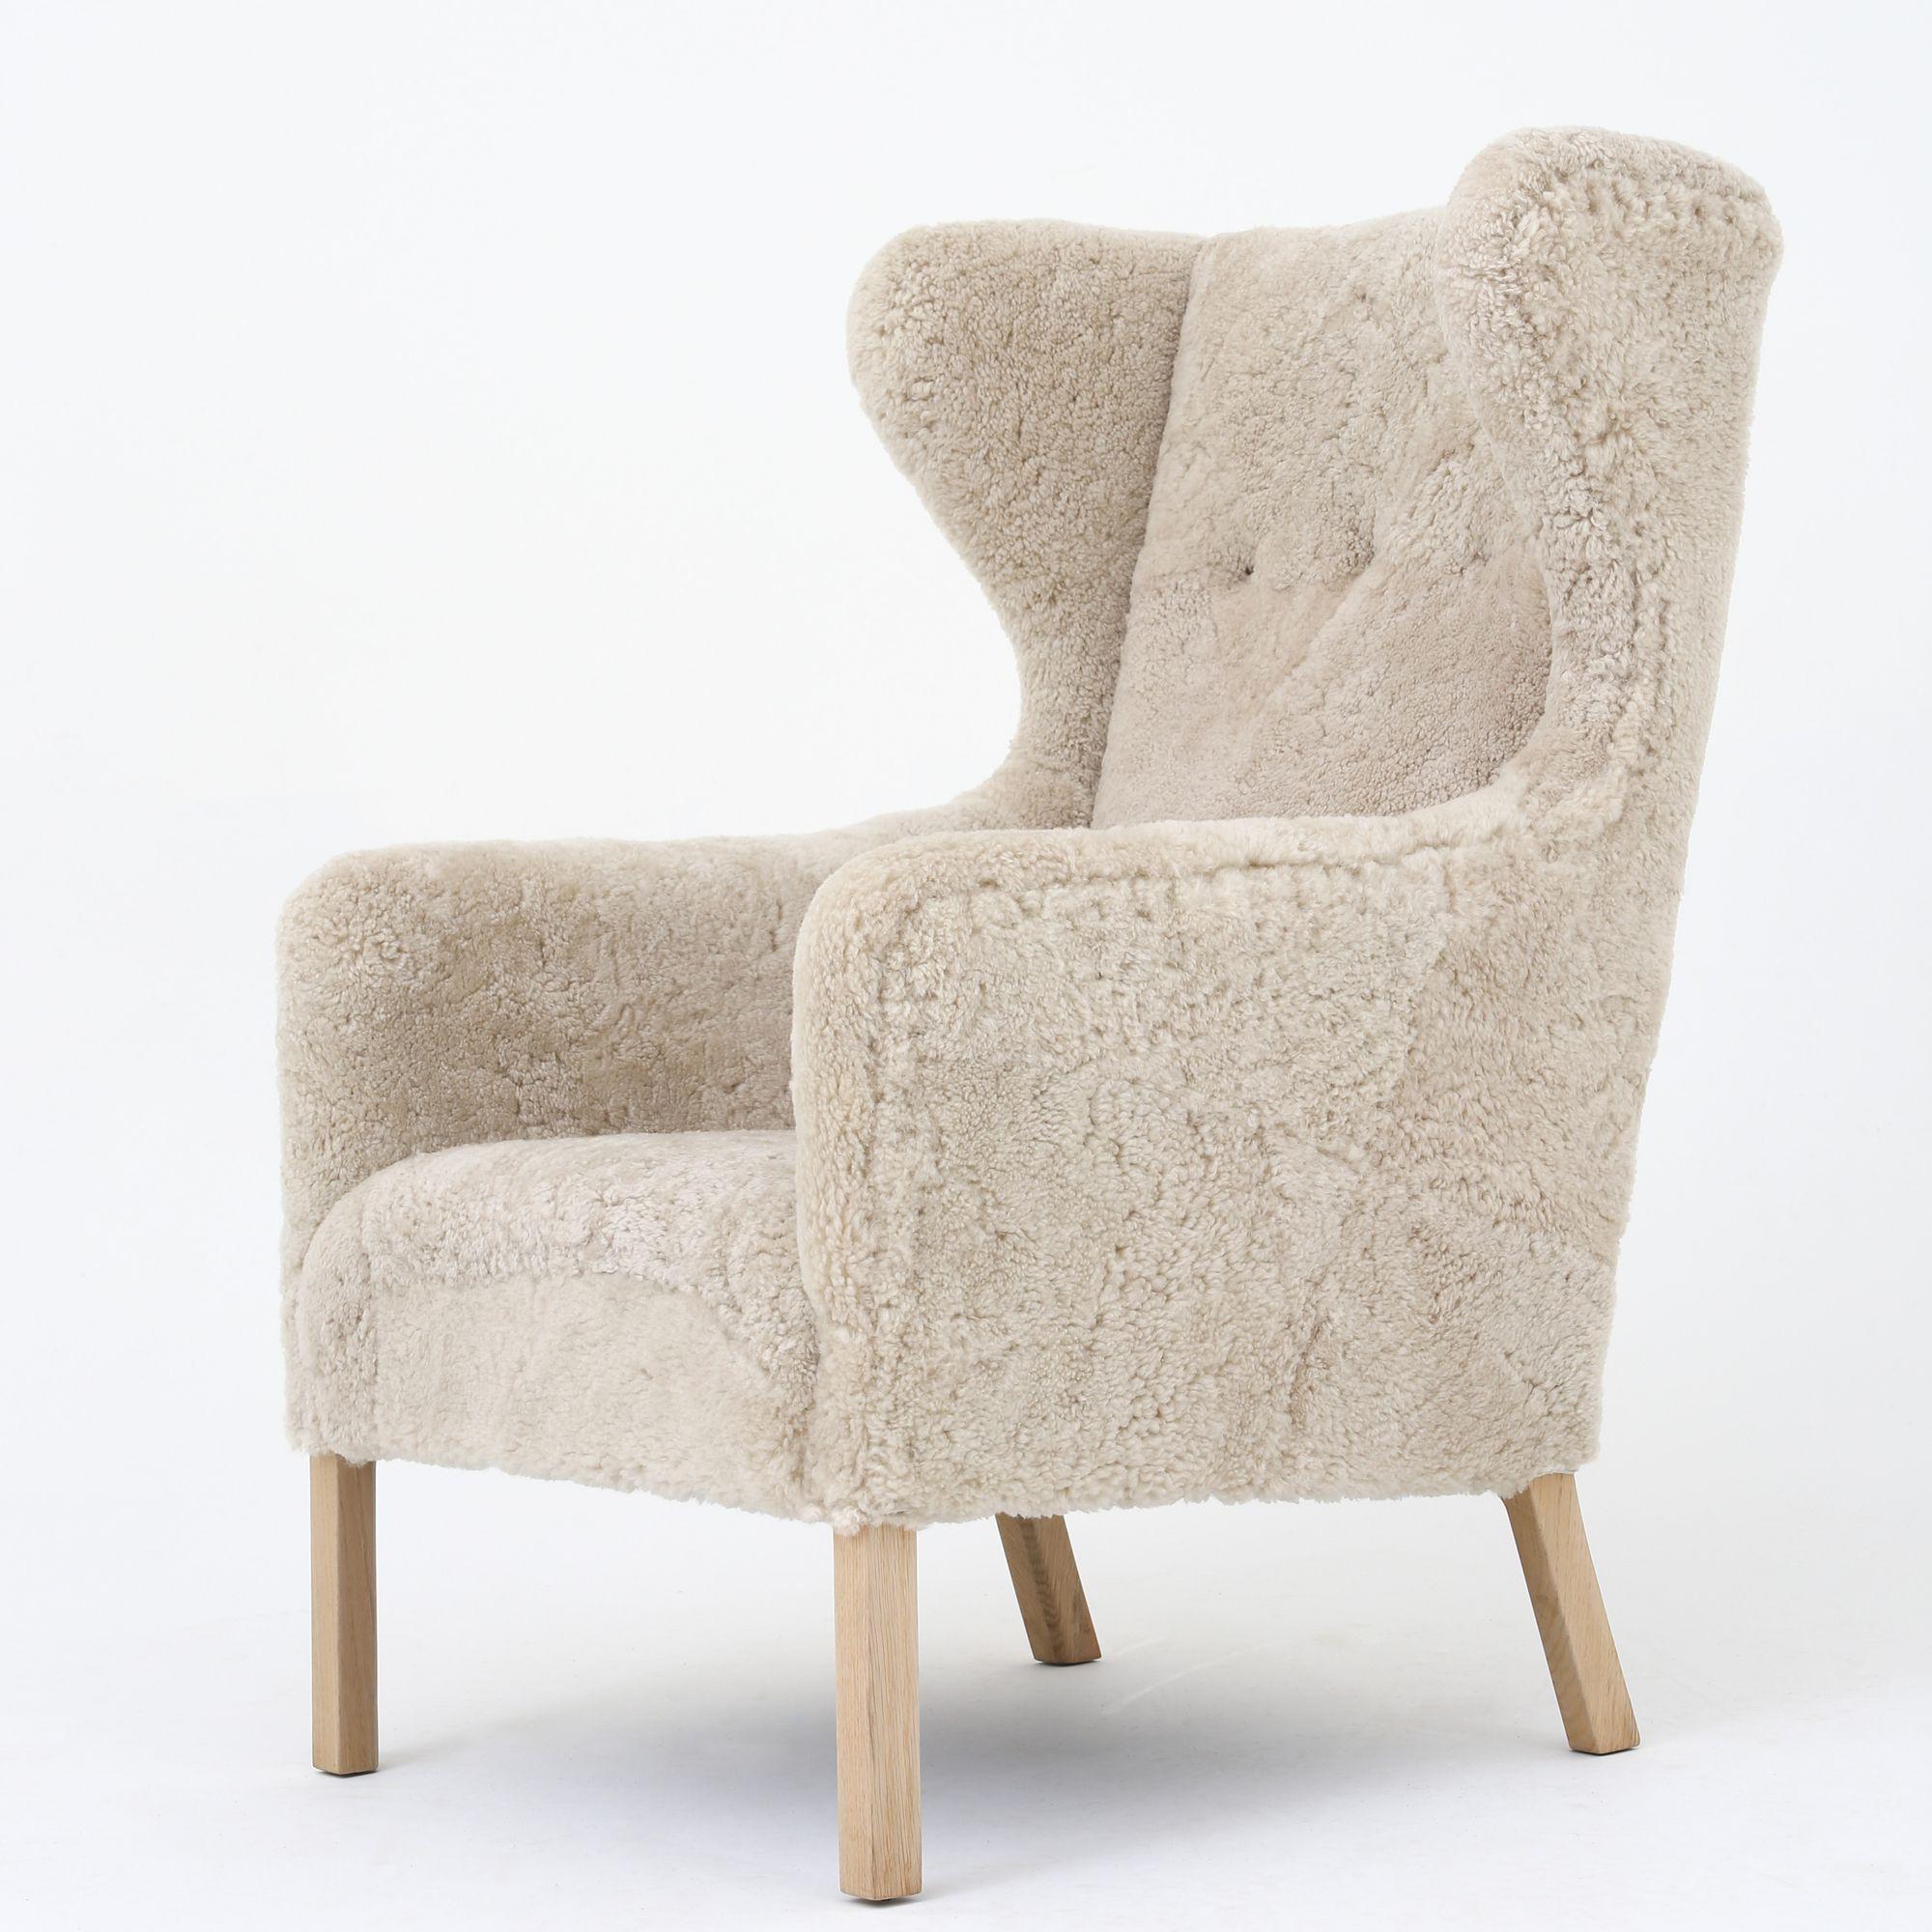 Model 'Slotsholm' wing-back chair with matching stool in new lambswool with legs in beech. The chair was originally designed for the Danish Parlament, Christiansborg, in Copenhagen.